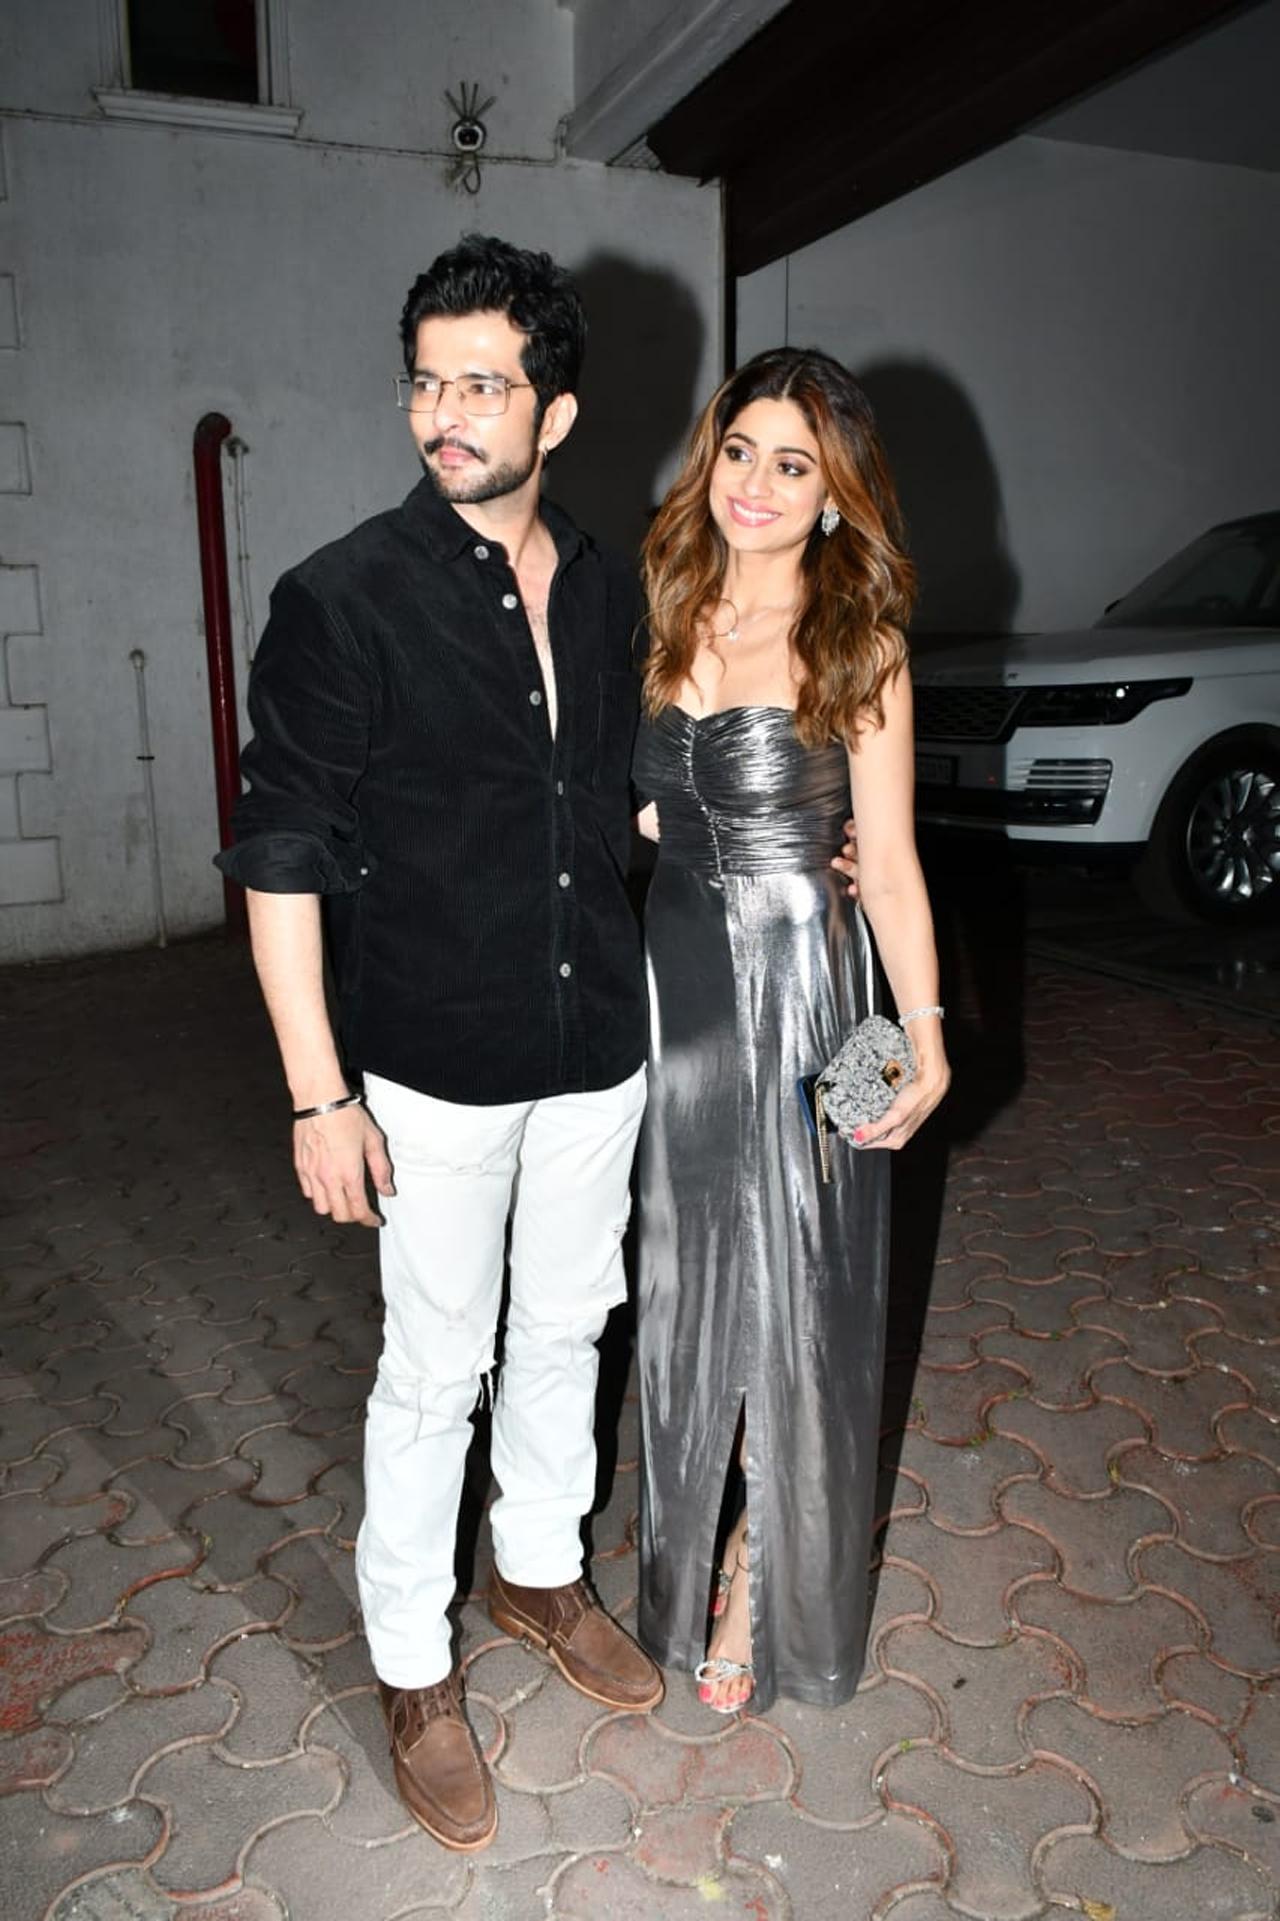 Raqesh Bapat showed off his uber-cool side in white pants and a black shirt. The duo has been grabbing eyeballs for their social media PDA, and now, when the media caught now, on the lens.